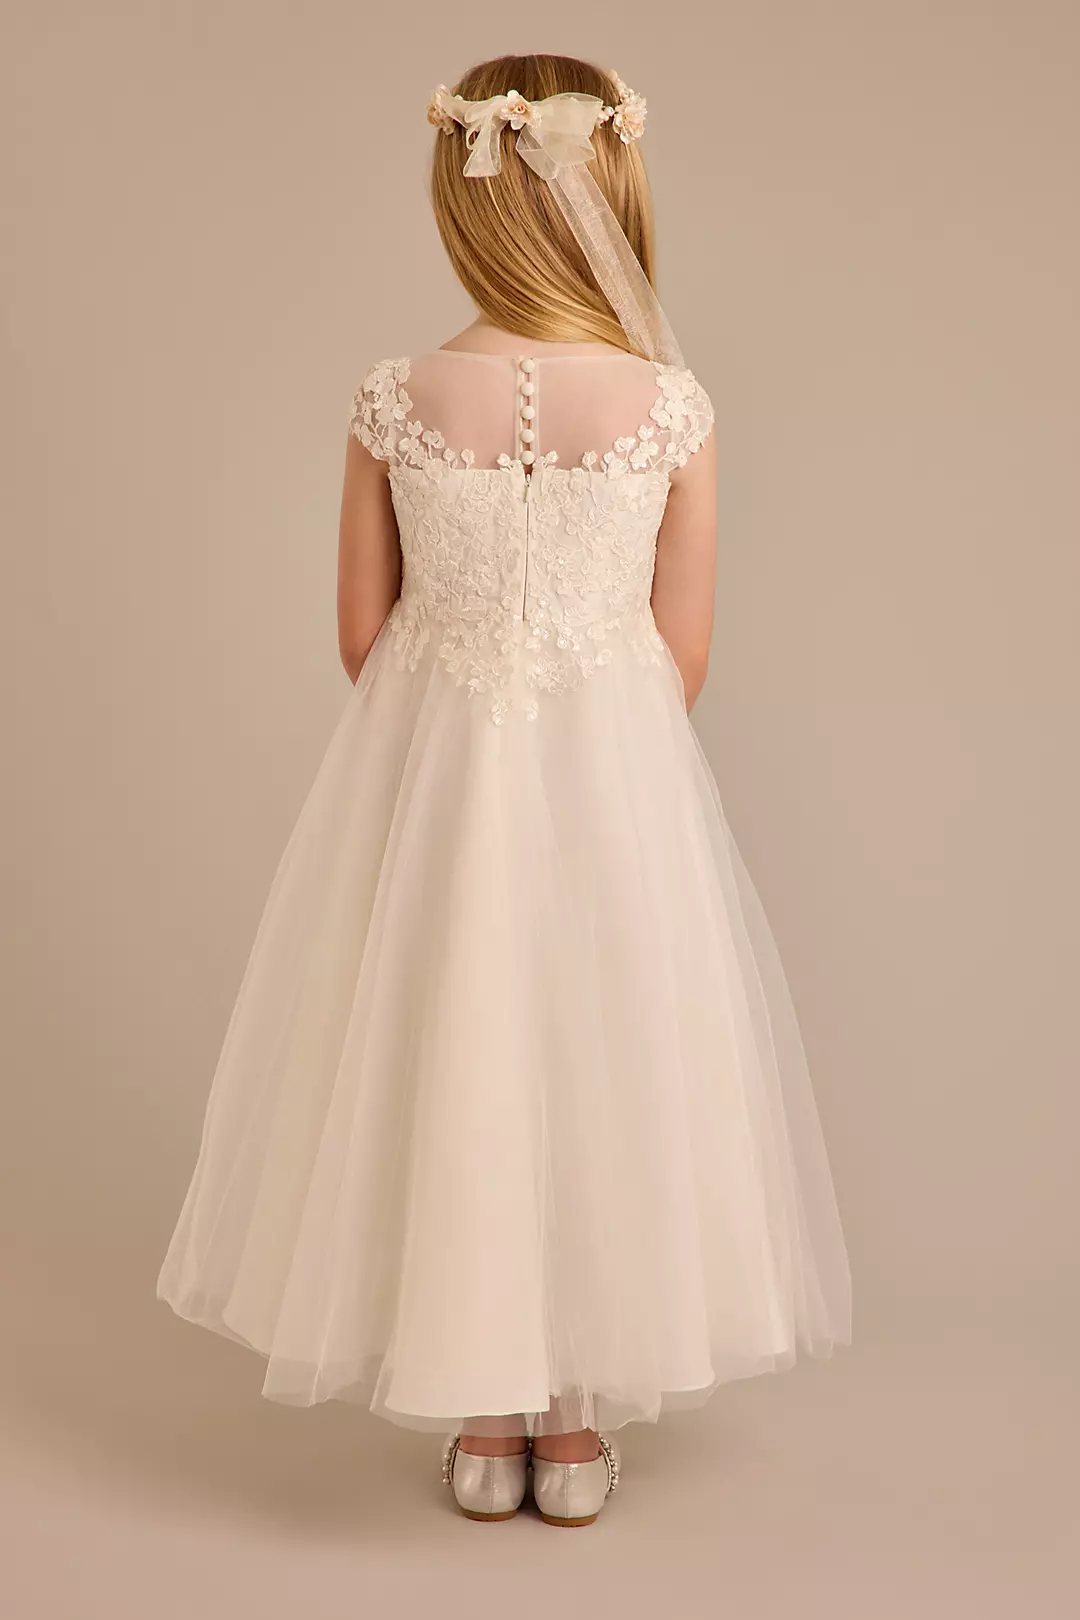 Tulle Flower Girl Dress with Lace Appliques Image 2